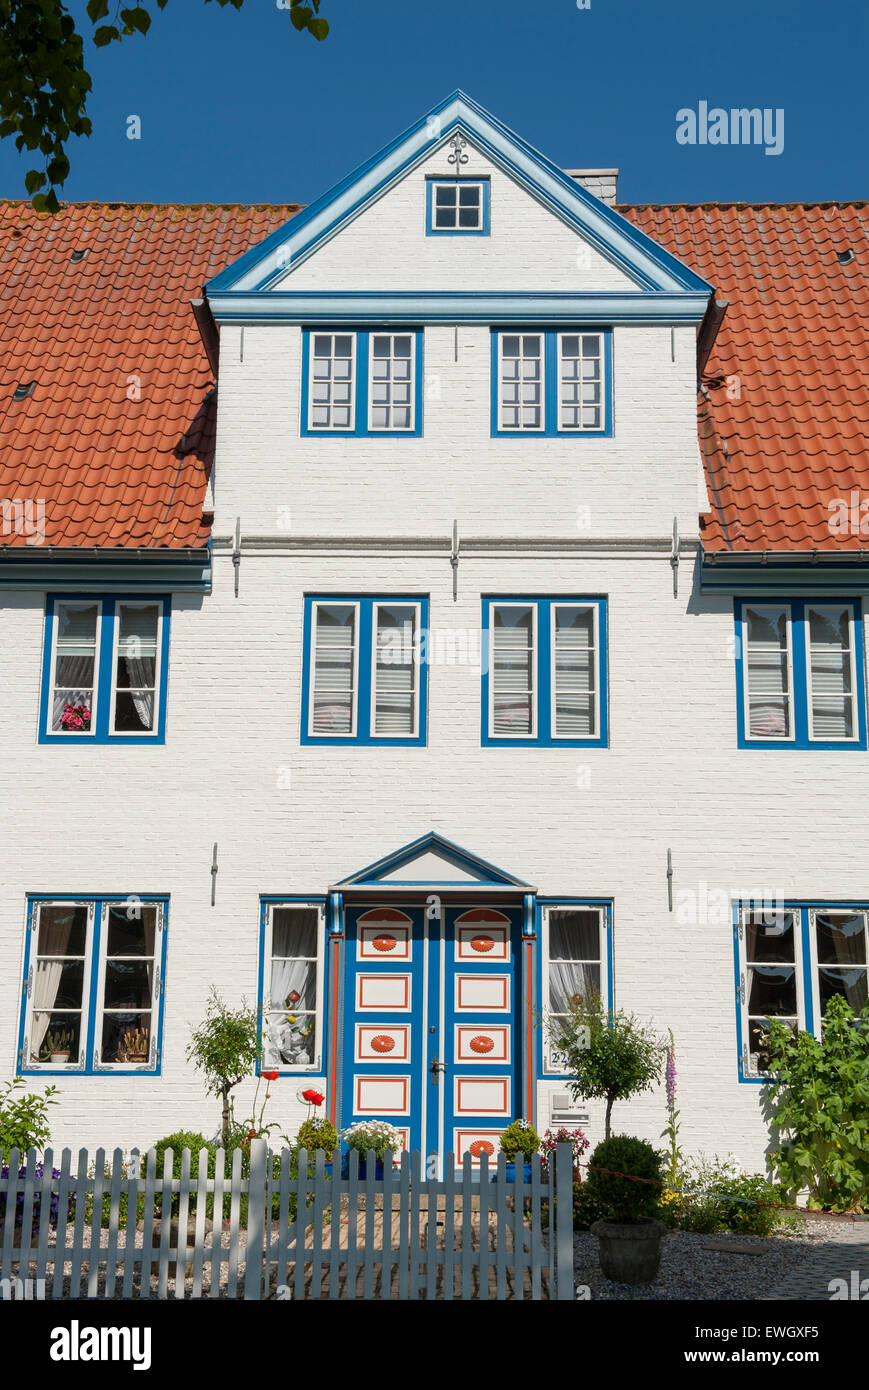 Traditional North Frisian facades are typical for the old town of Tönnning, a small port on the Eiderstedt peninsula, Germany Stock Photo